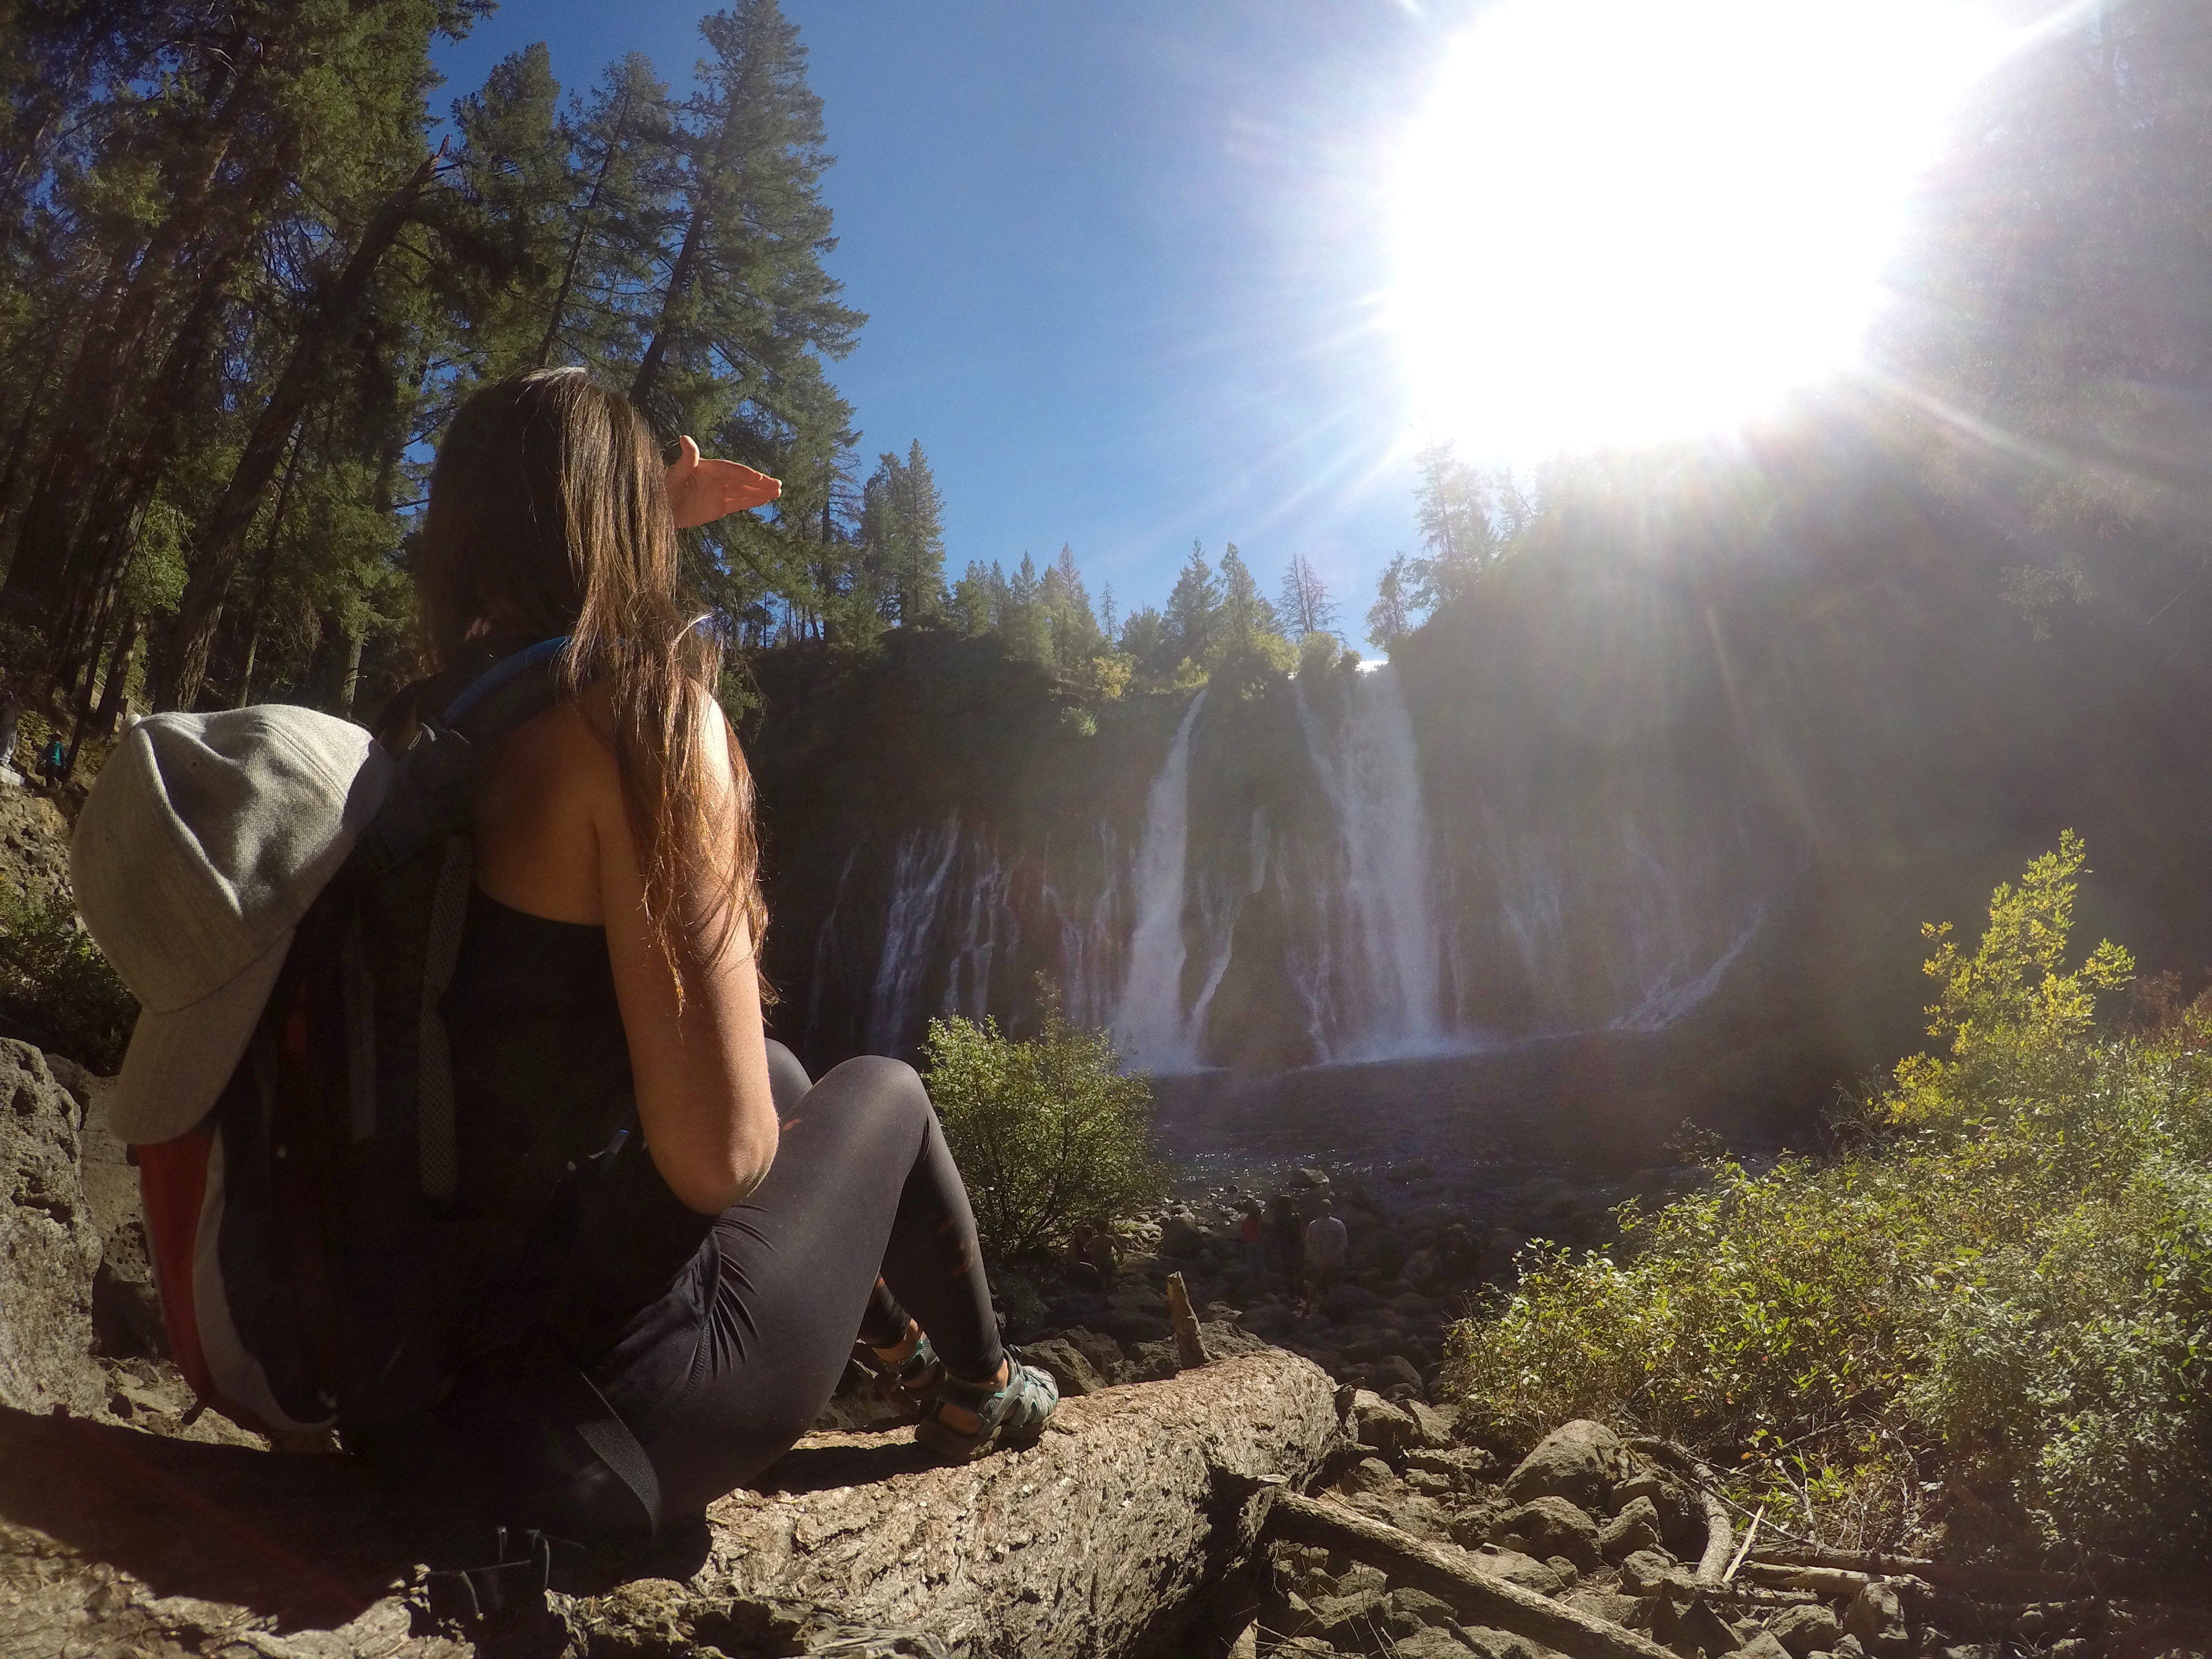 Angela Latham admiring Burney Falls from shore in Burney, California as seen on Travel Channel's Top Secret Waterfalls episode TTWF101H.